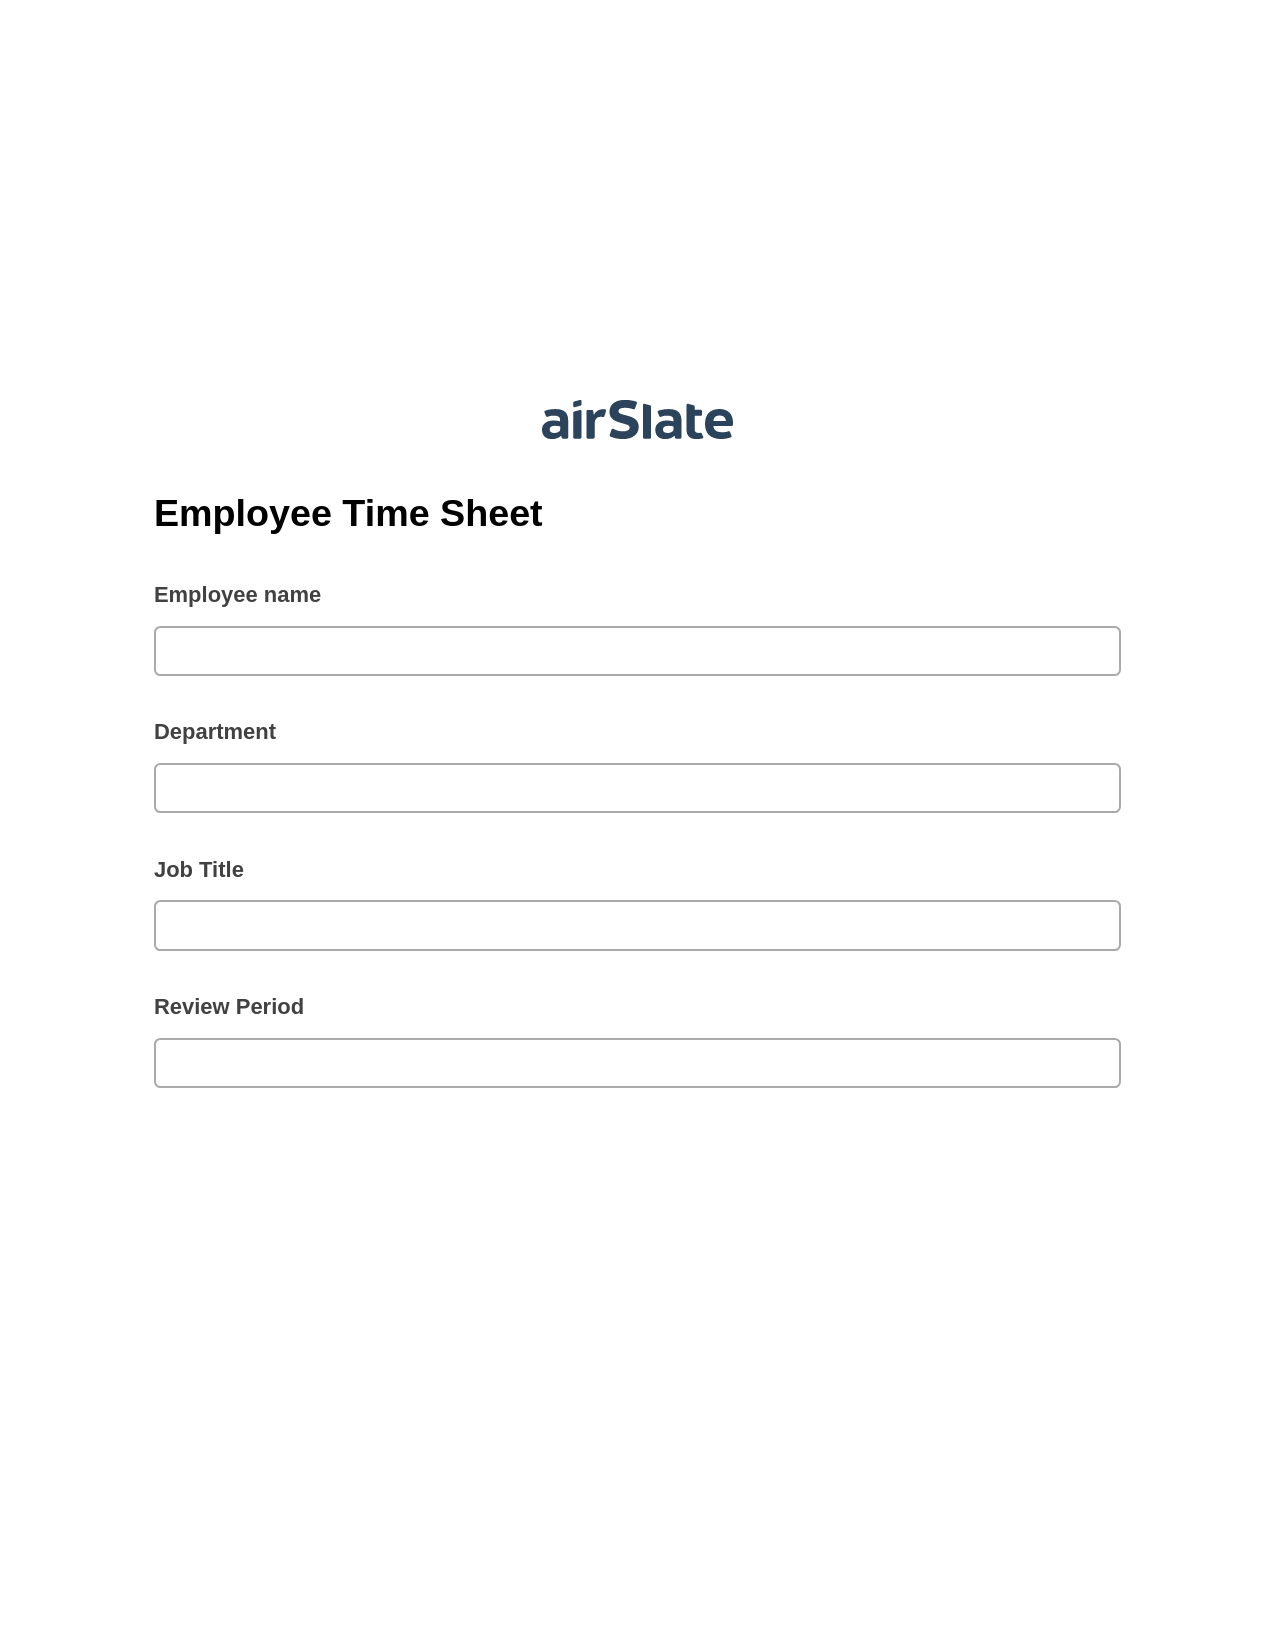 Employee Time Sheet Pre-fill from Excel Spreadsheet Bot, Update Audit Trail Bot, Archive to SharePoint Folder Bot